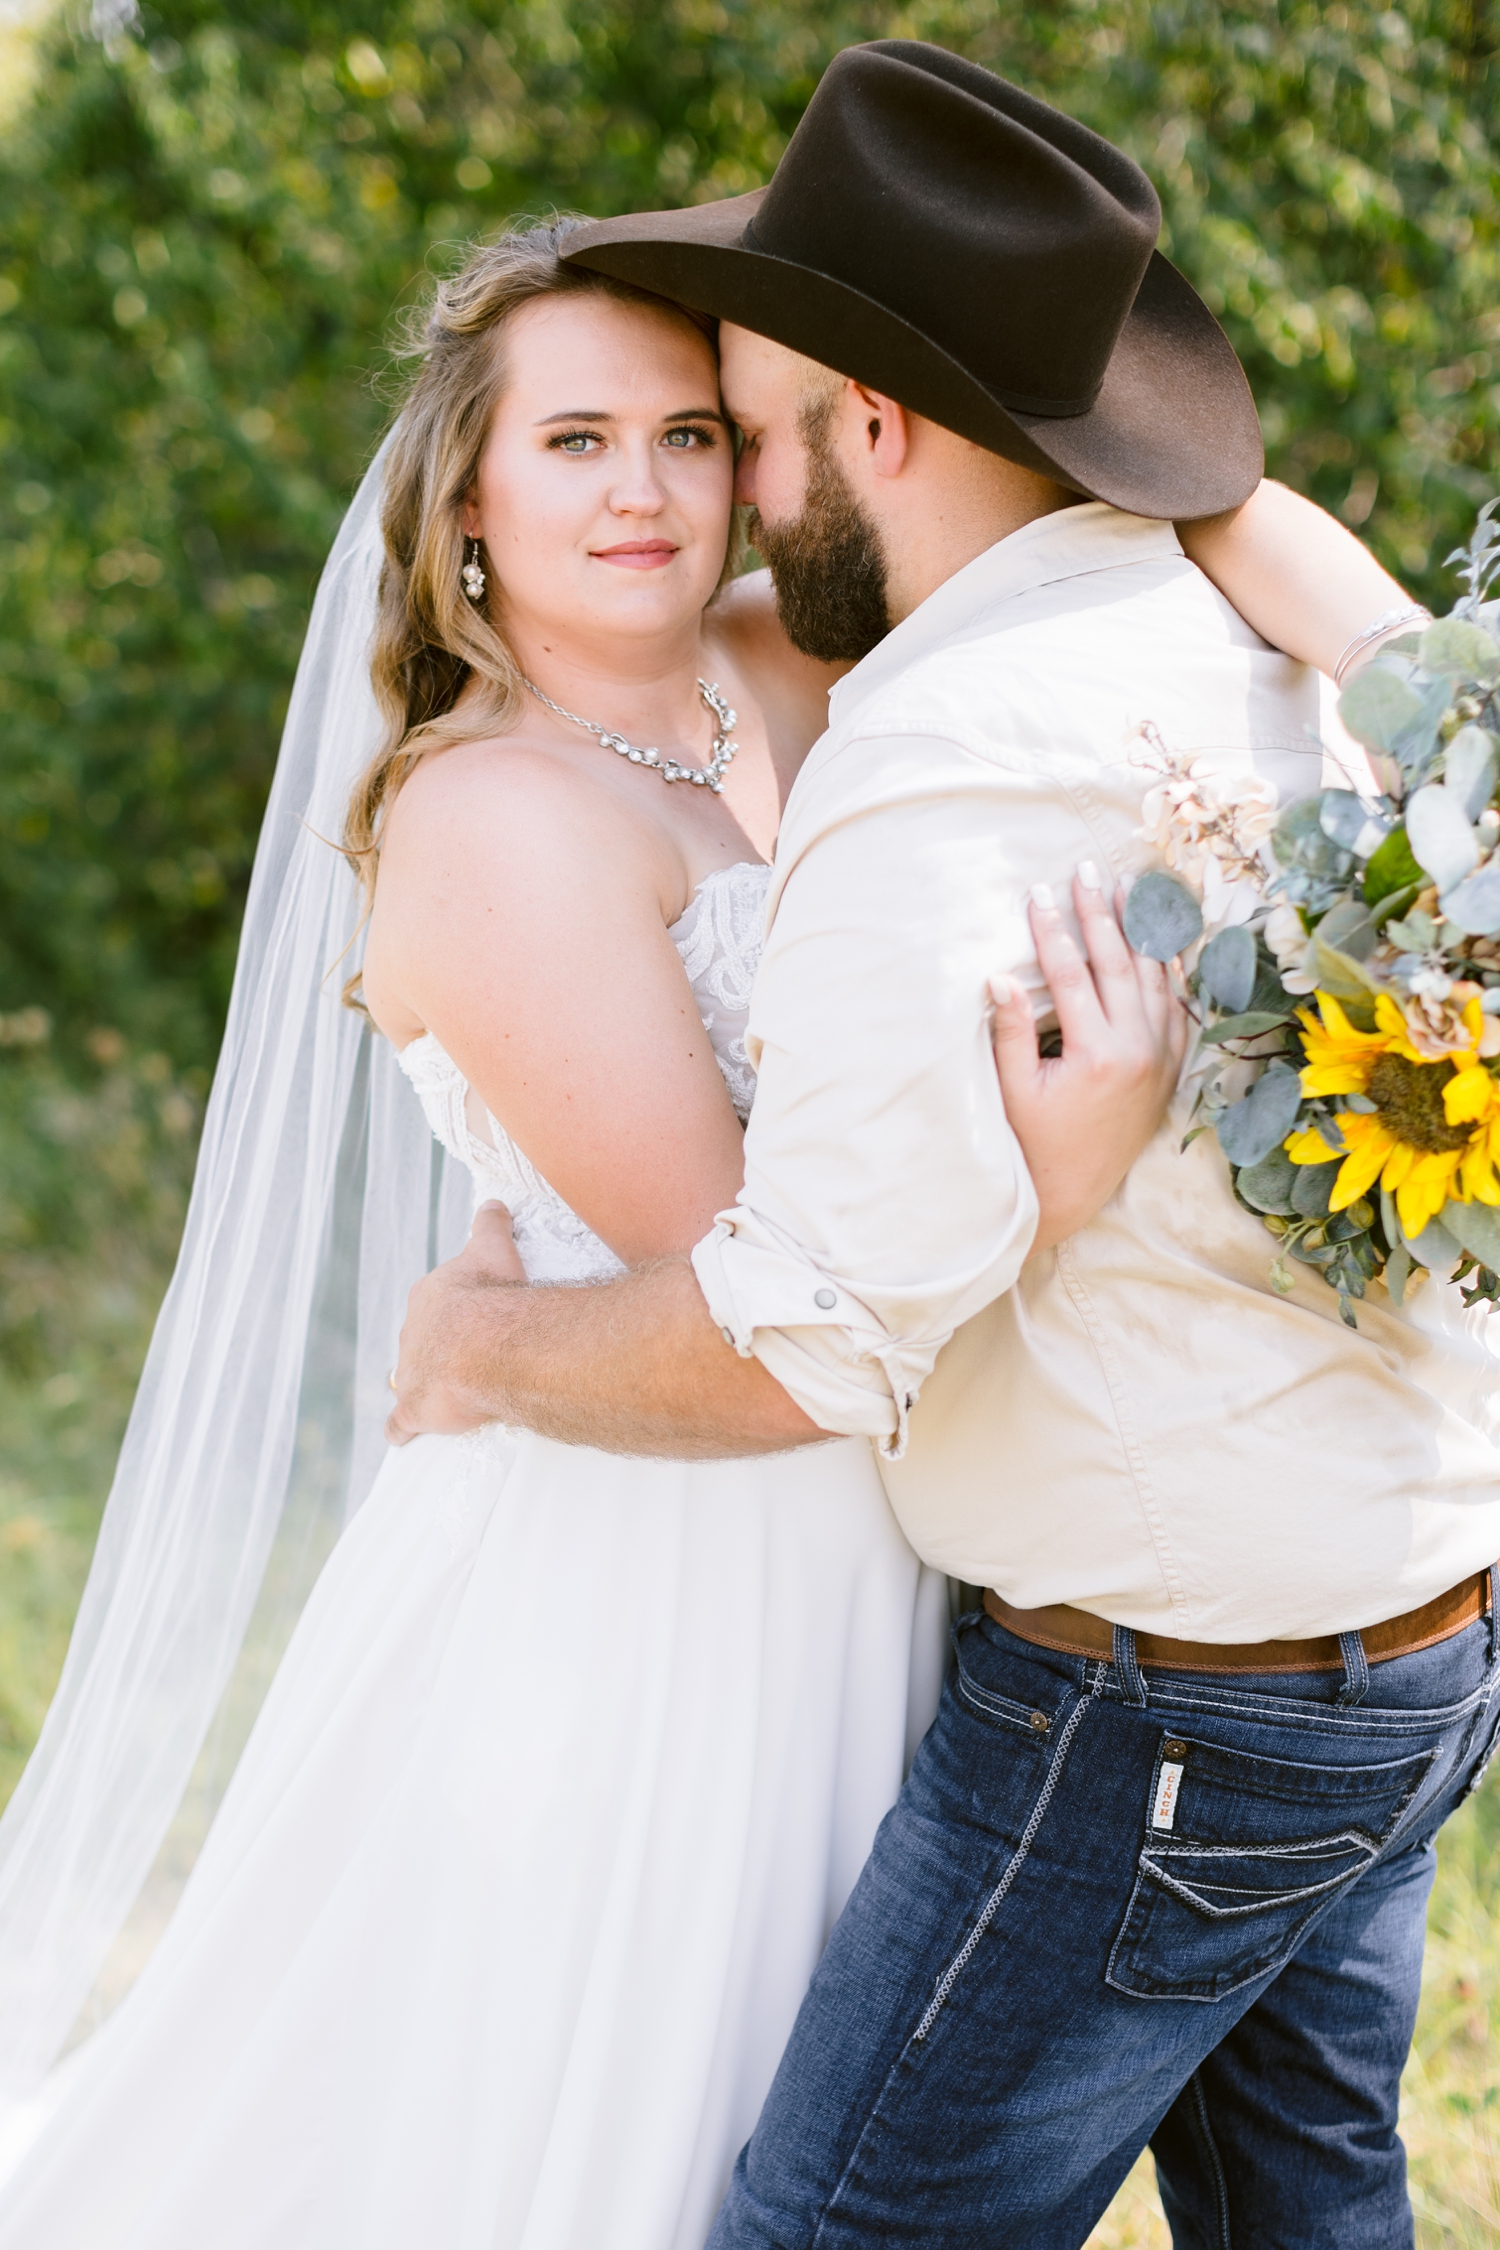 Matt nuzzle his bride, Megan, close as she stares into the camera | A rustic, country wedding with western touches | CB Studio